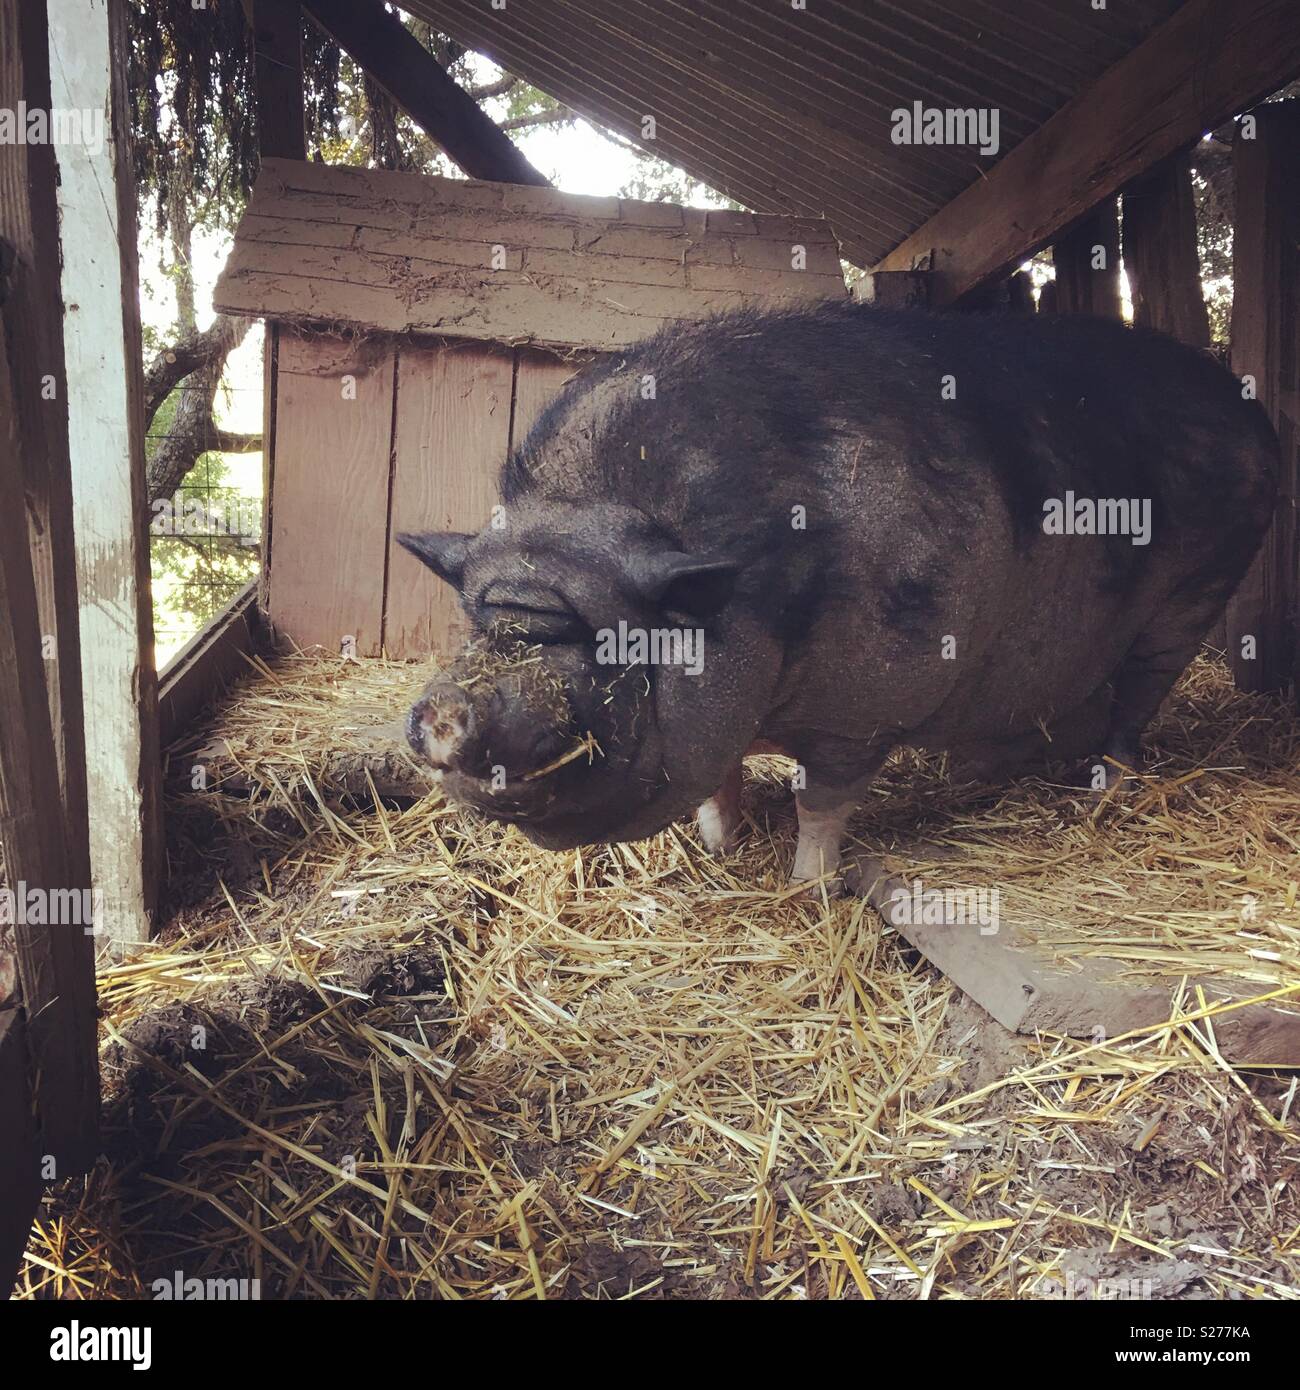 A large pig. Stock Photo